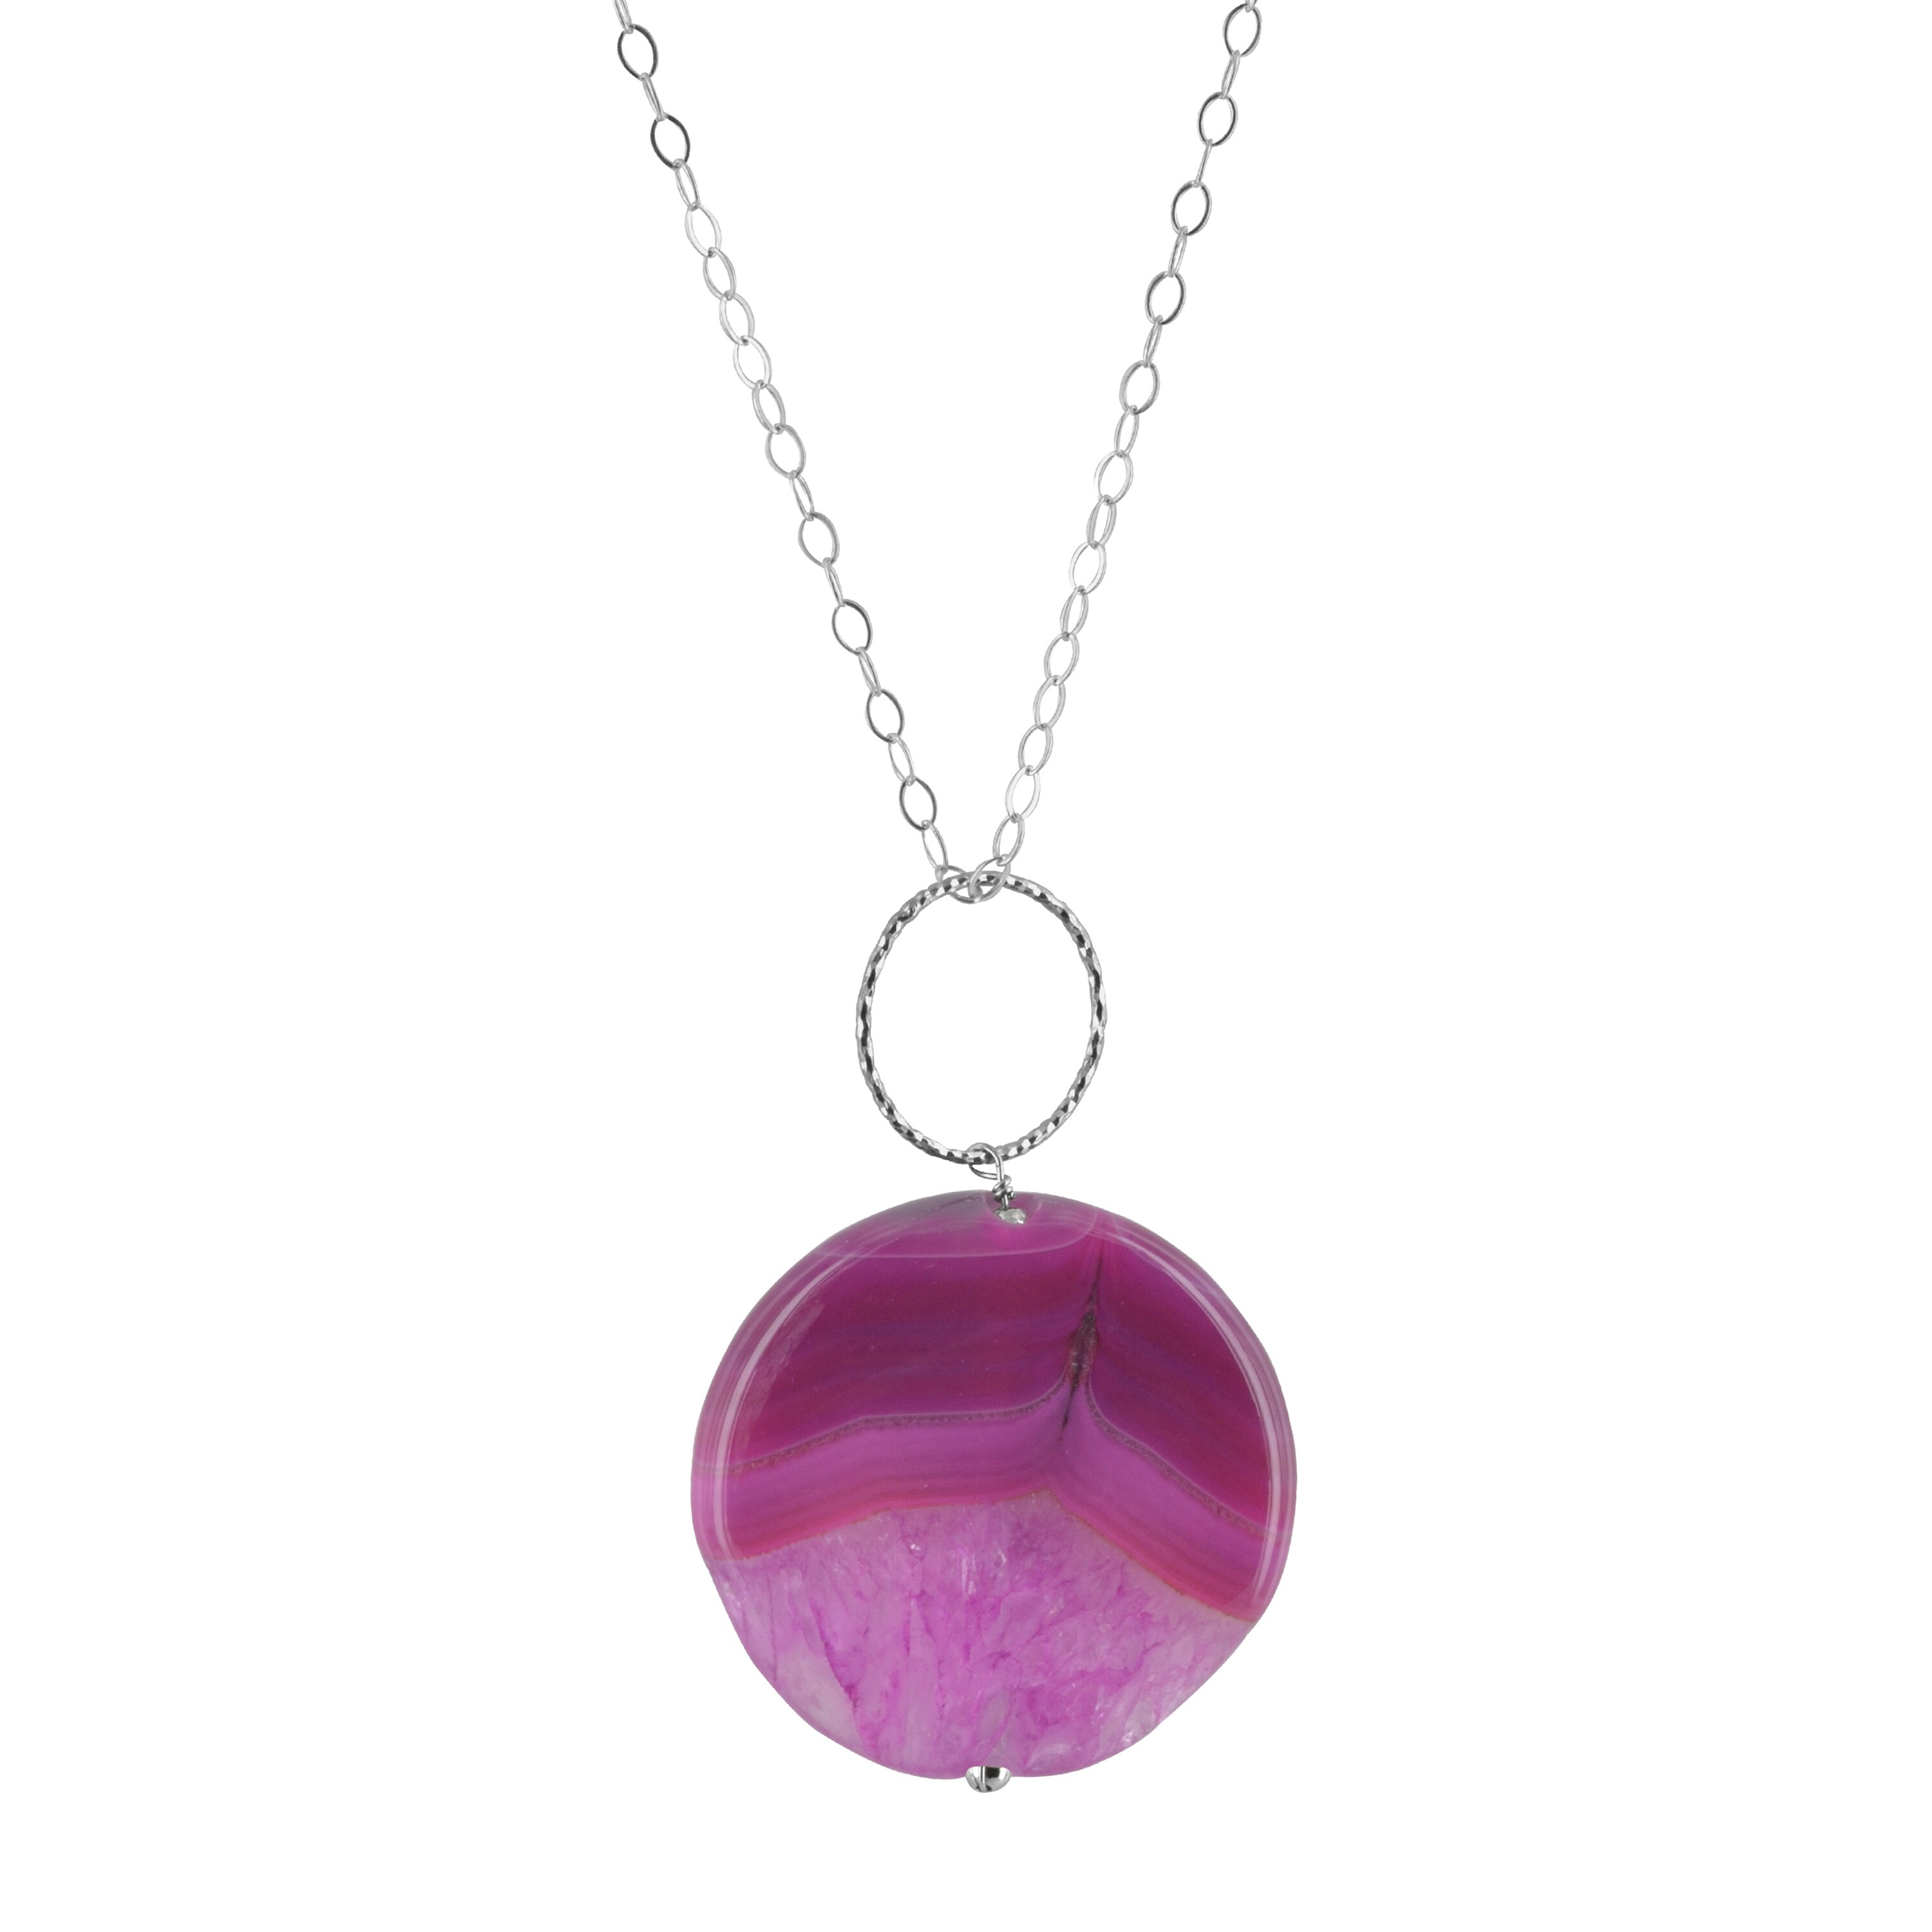 ASHANTI Pink Agate Natural Gemstone Sterling Silver Handcrafted Stainless Steel Wire Necklace 